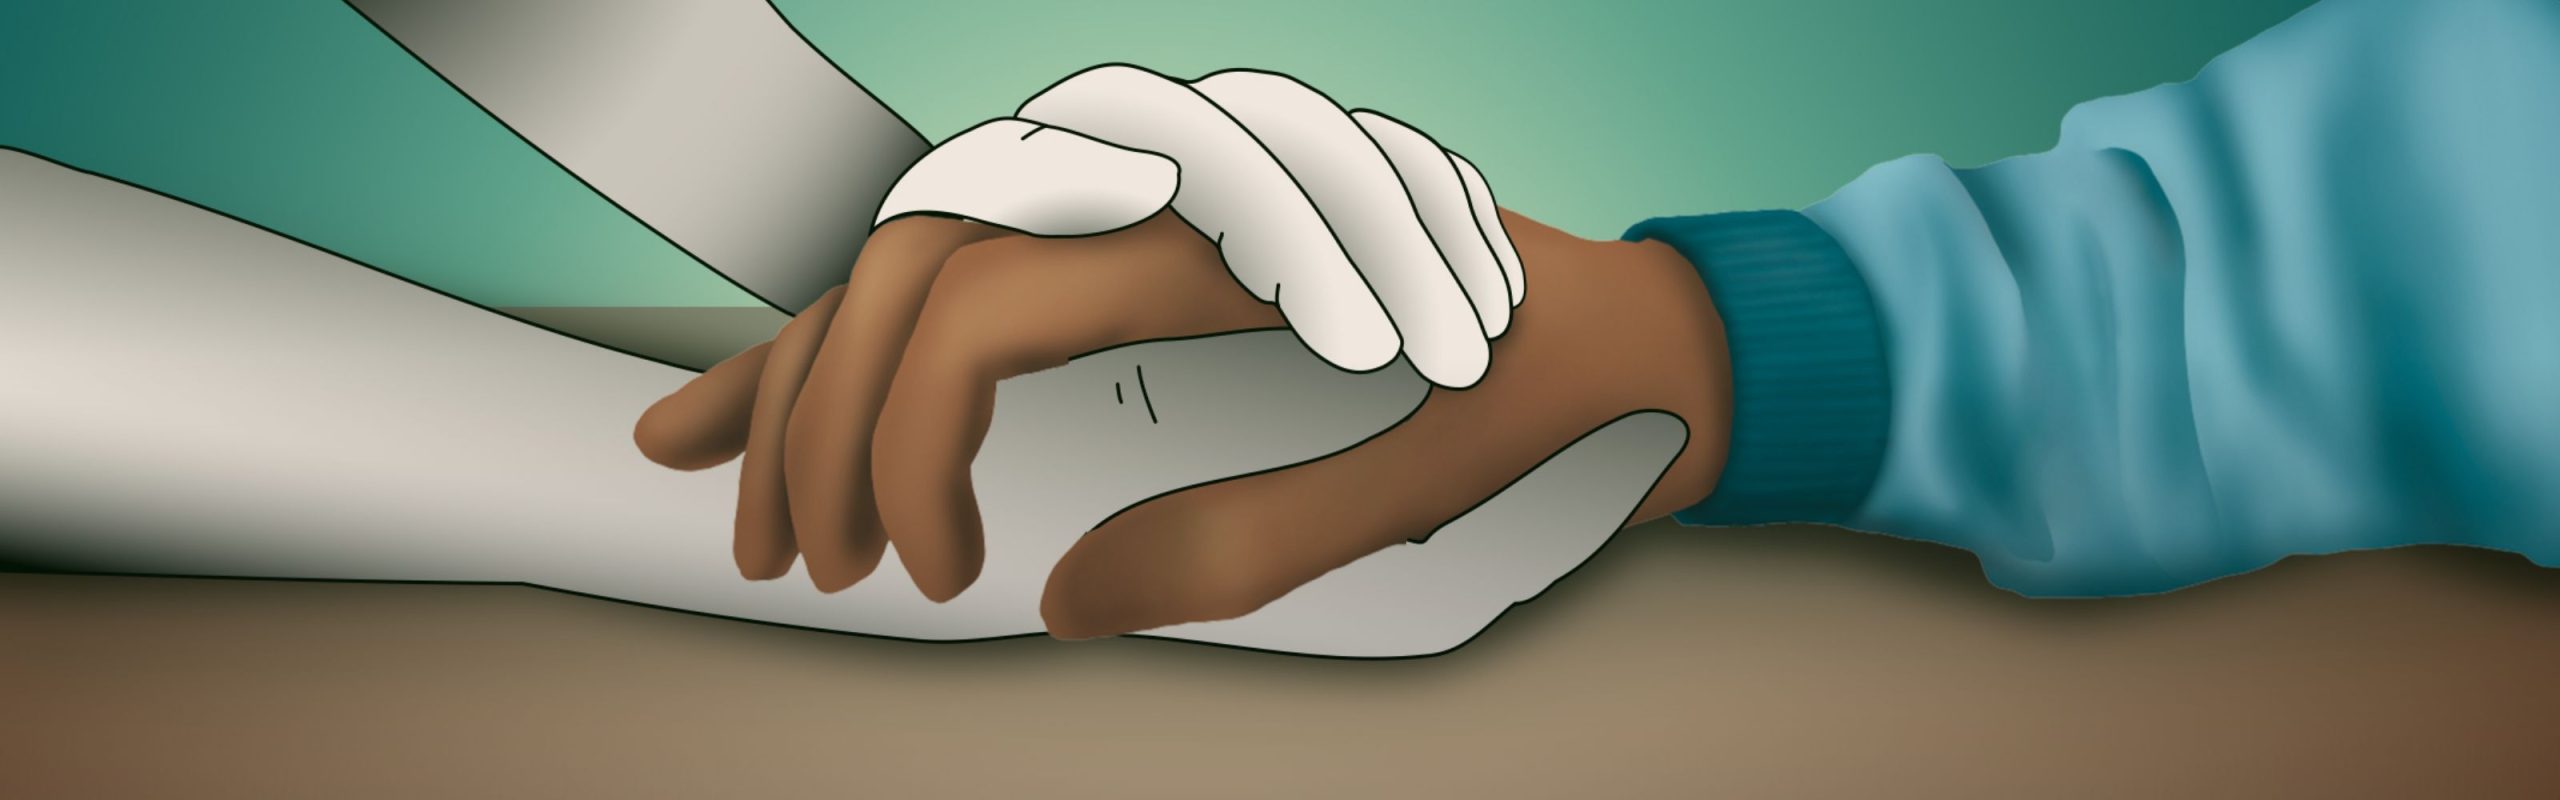 An illustrated depiction of a pair of hands holding another hand compassionately